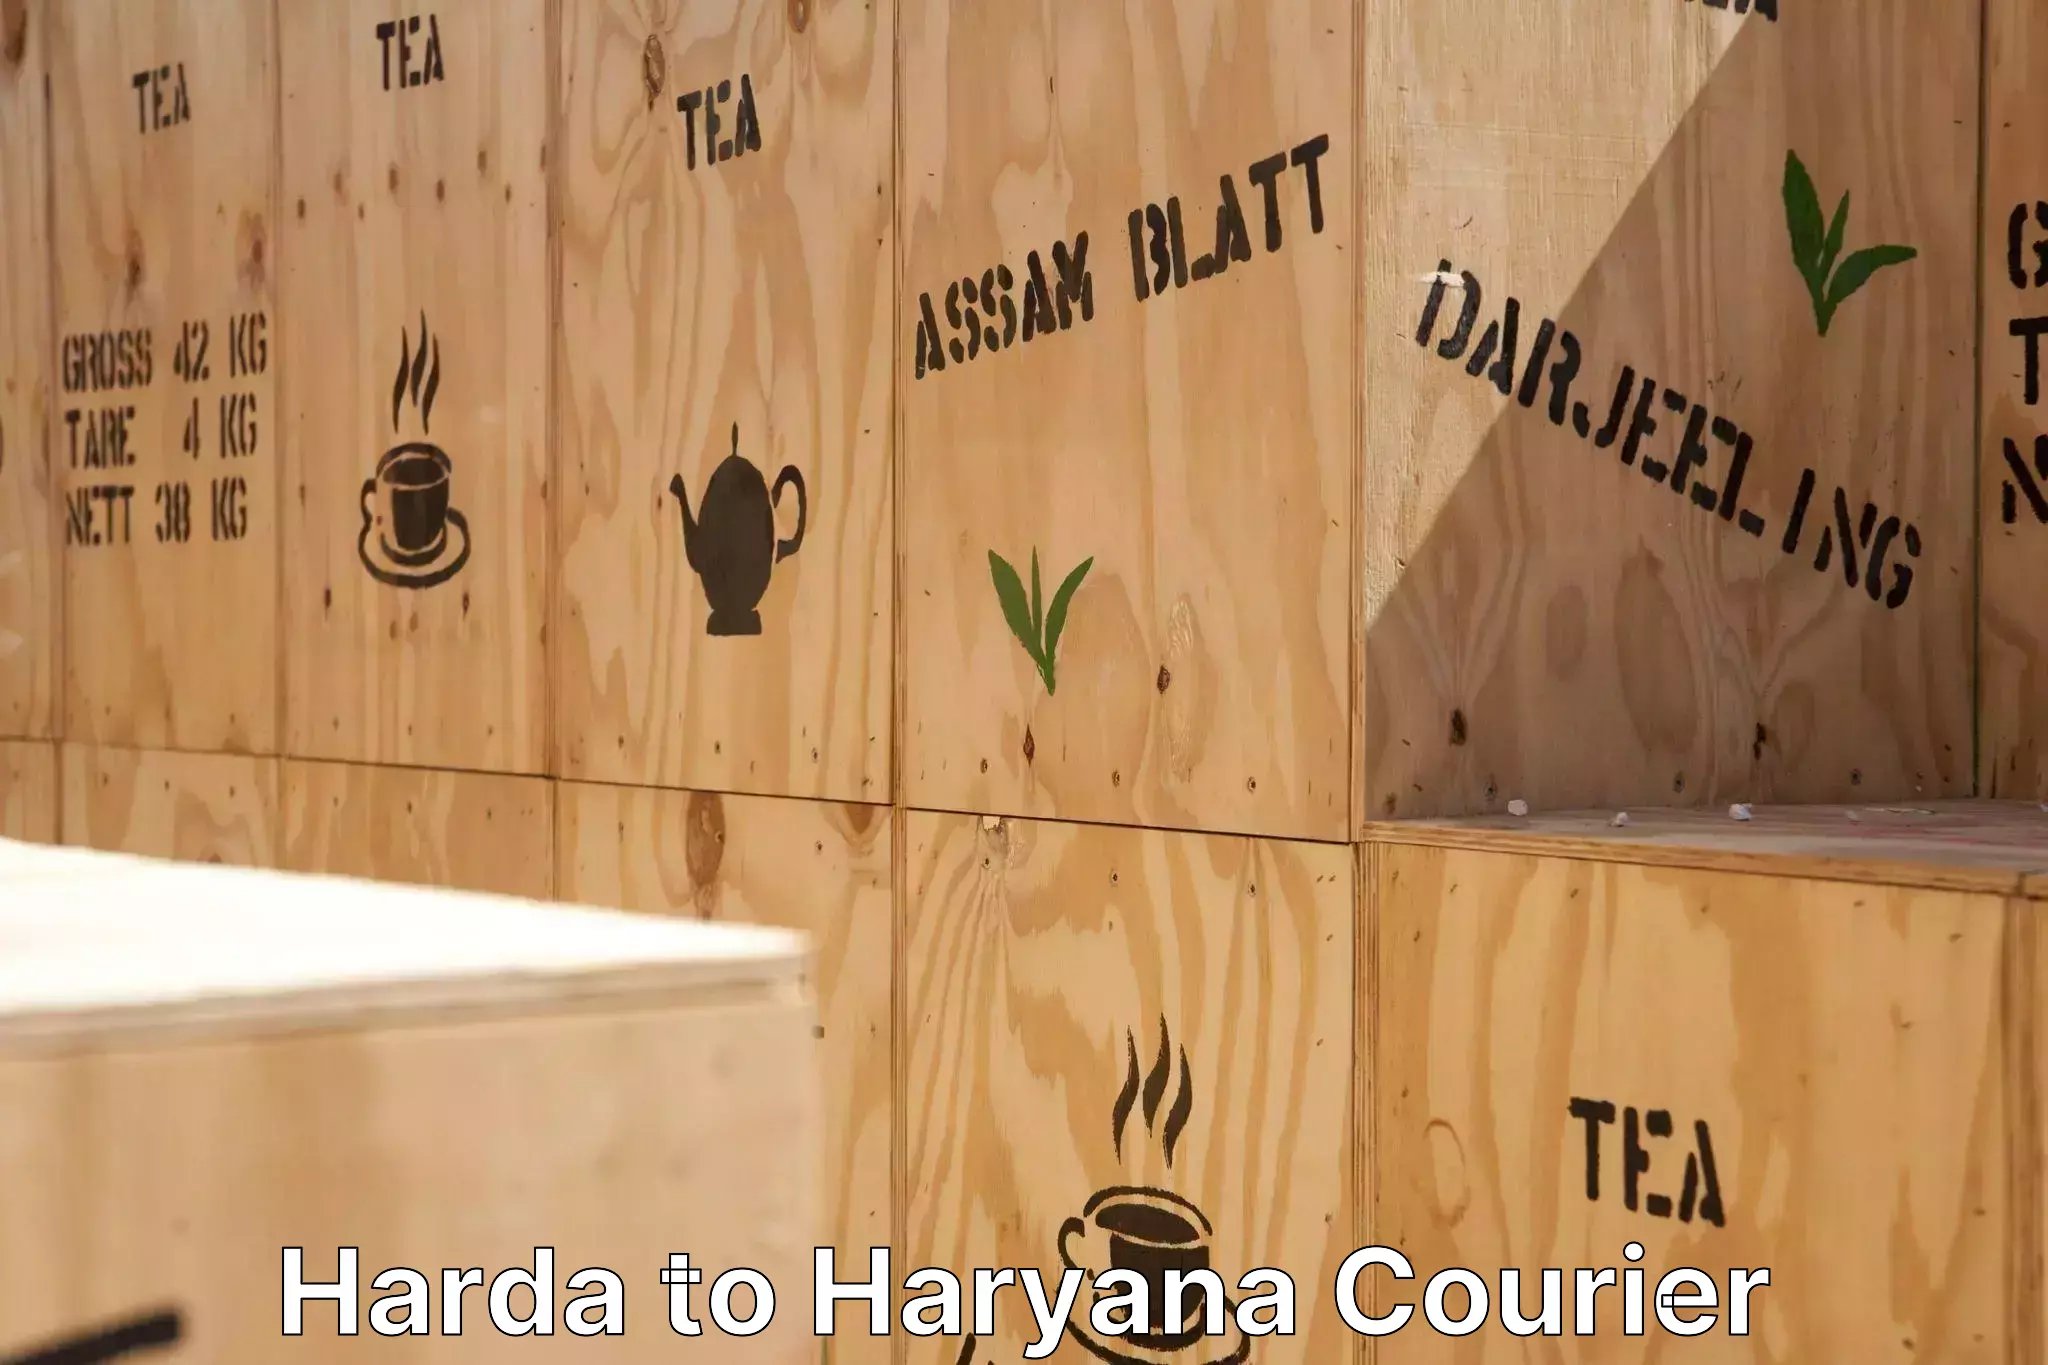 Furniture delivery service in Harda to Jhajjar